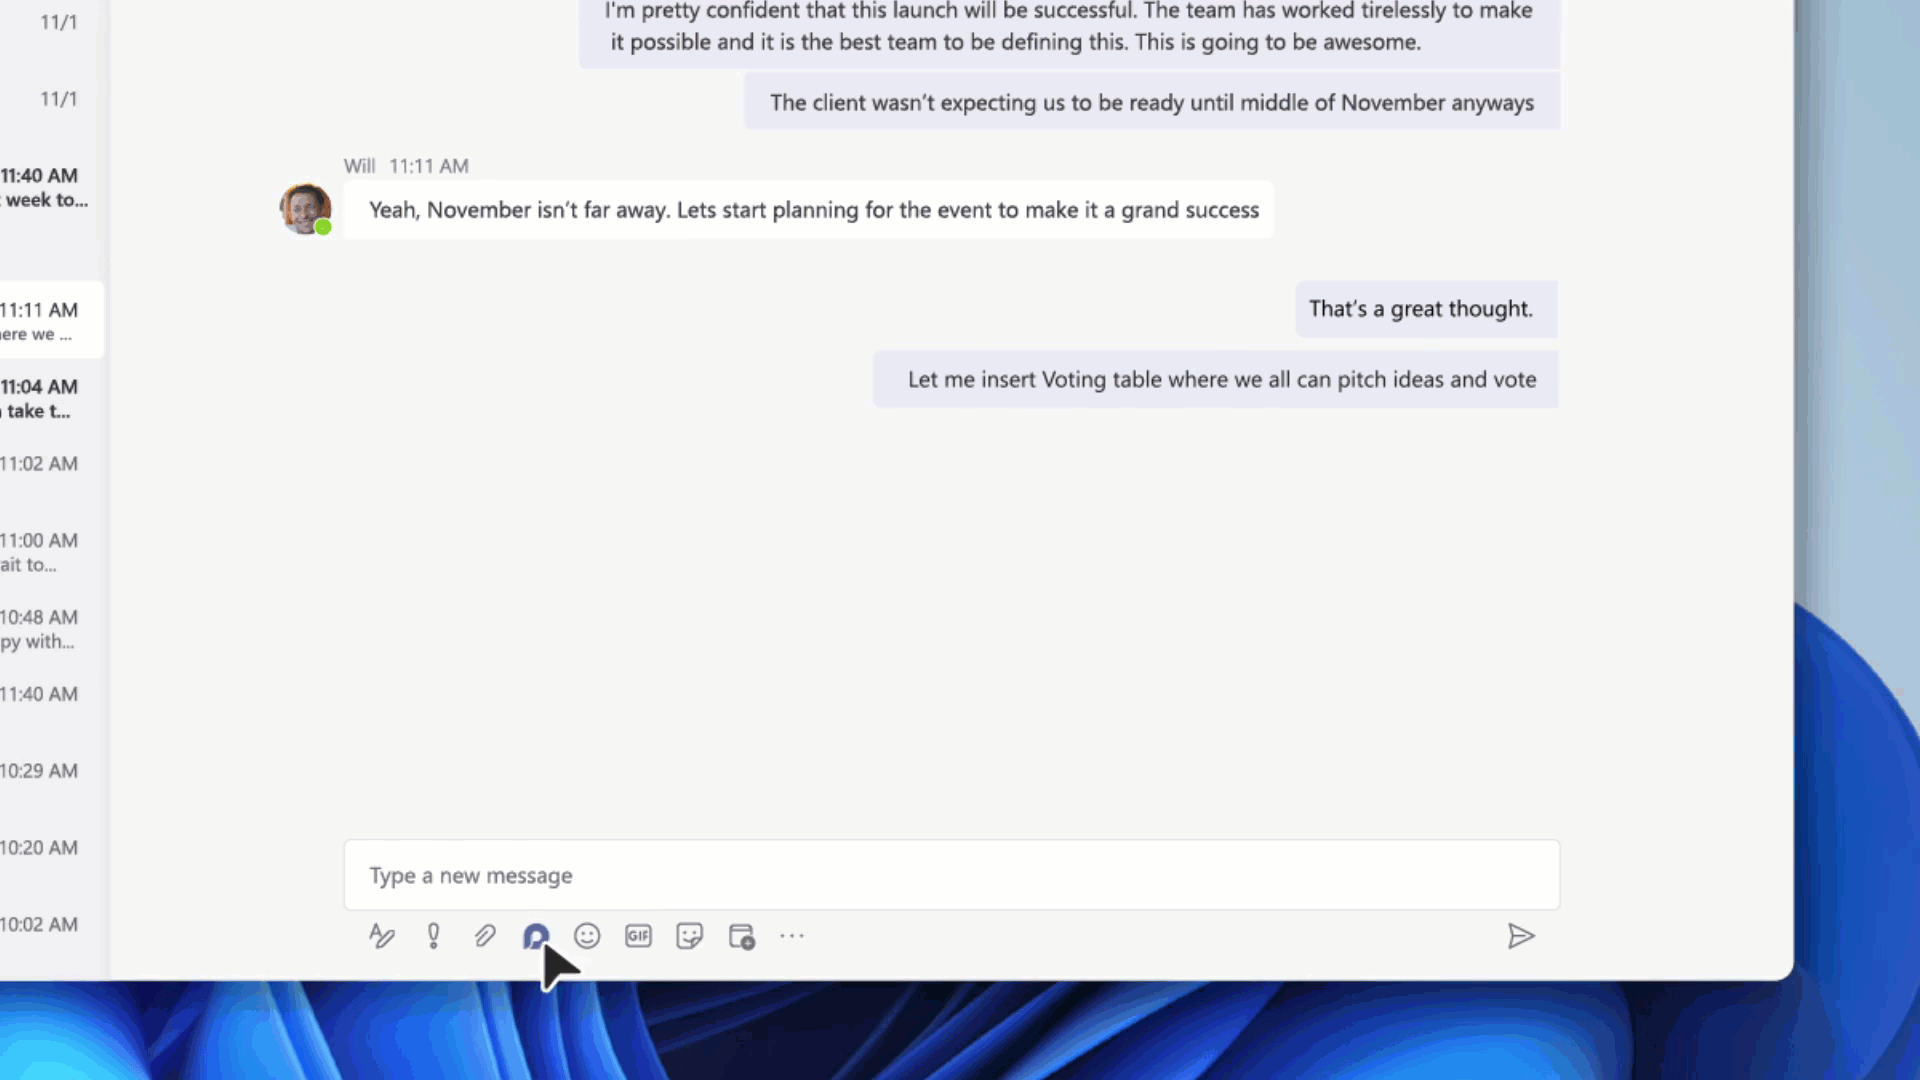 Microsoft Loop let's you insert and edit a table in a Teams chat.